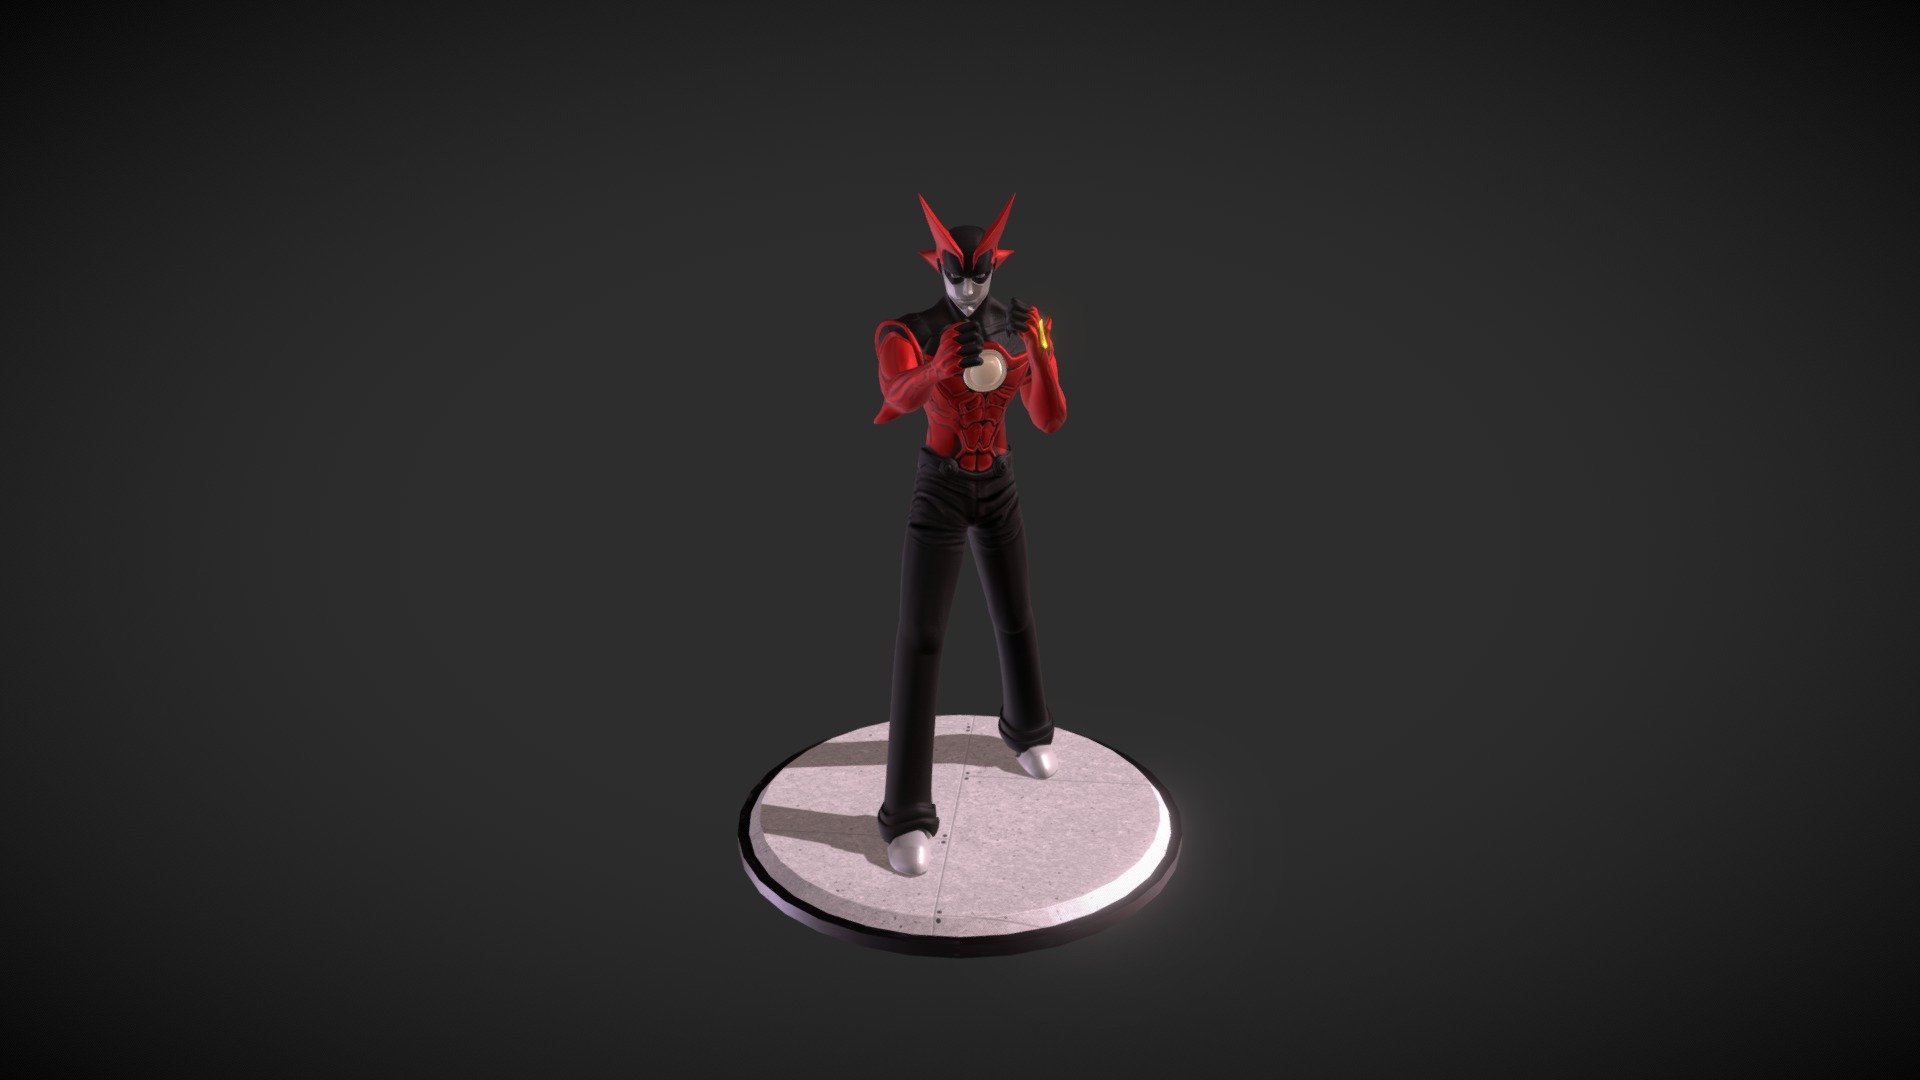 3d model in honor of the character Zetman, from the anime of the same name, made using Blender and Substance Painter 3d model